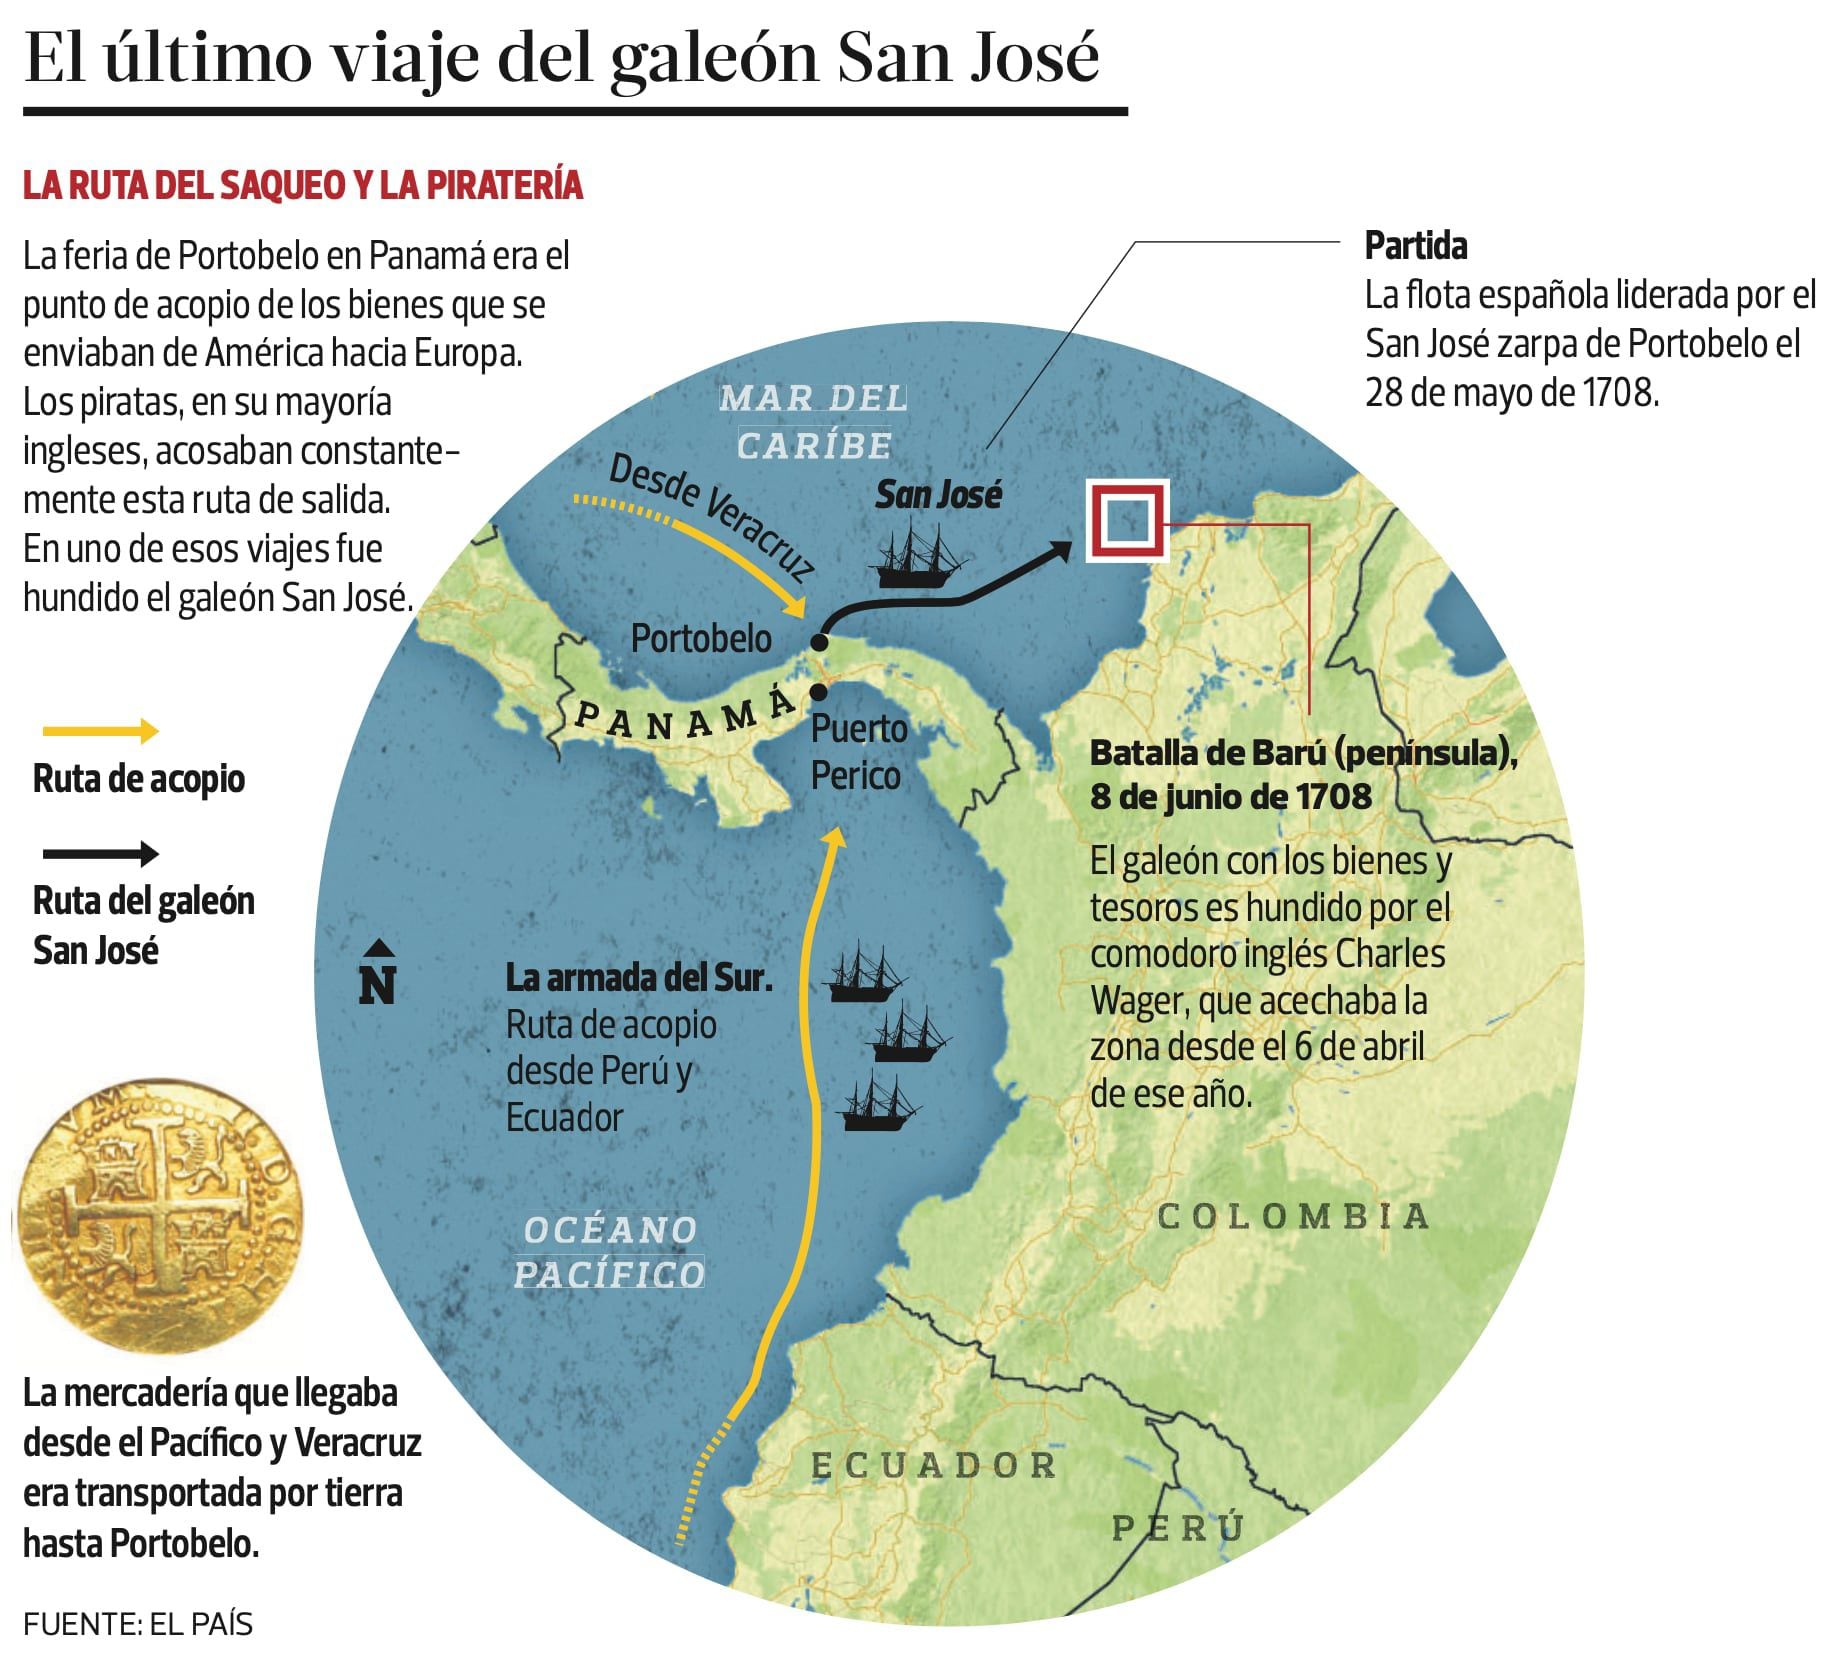 Infographic about the San José galleon published in the El Dominical supplement of El Comercio, in 2016.